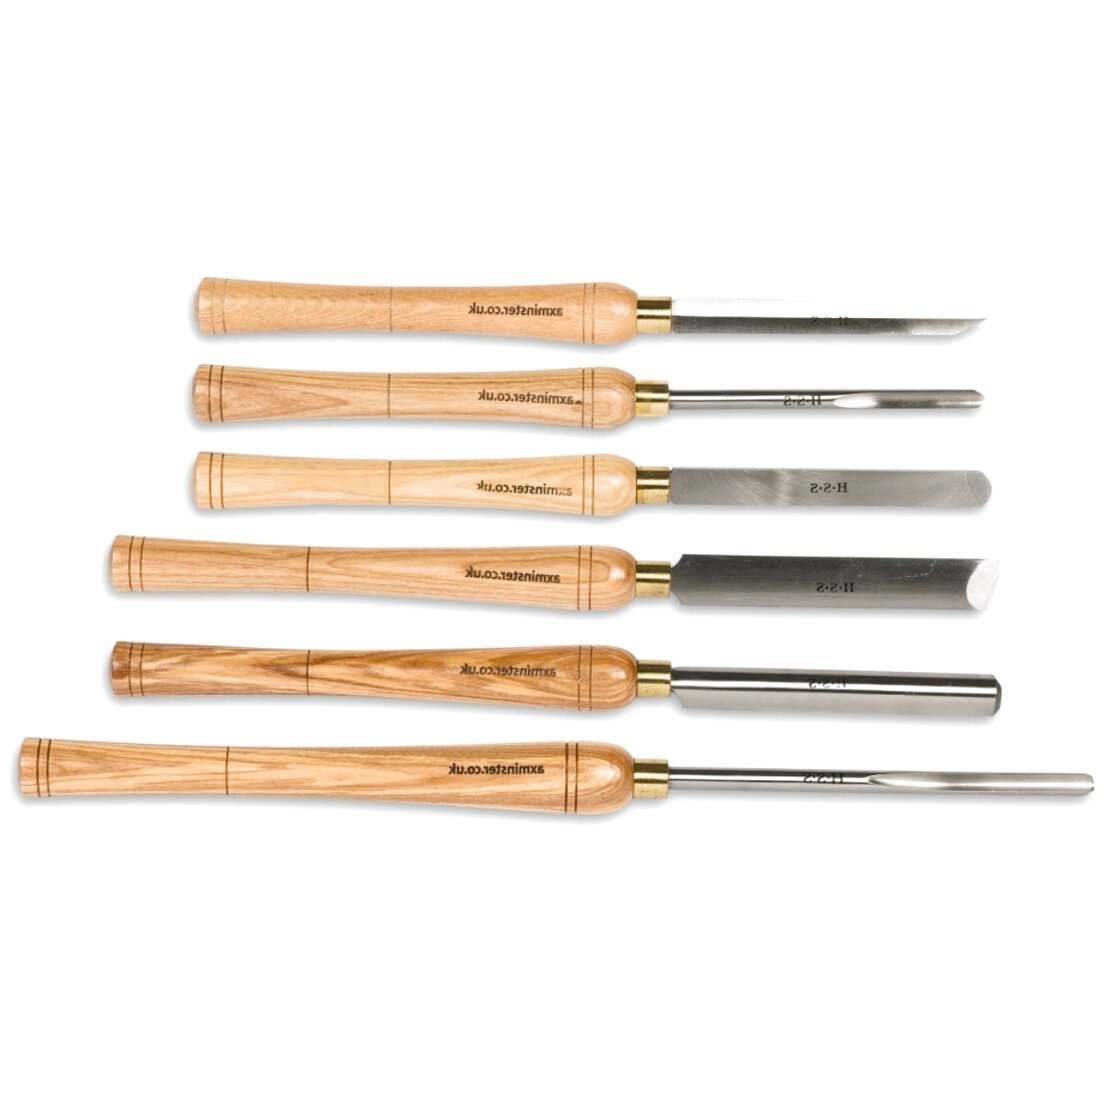 Woodturning Tools For Sale In Uk View 51 Bargains